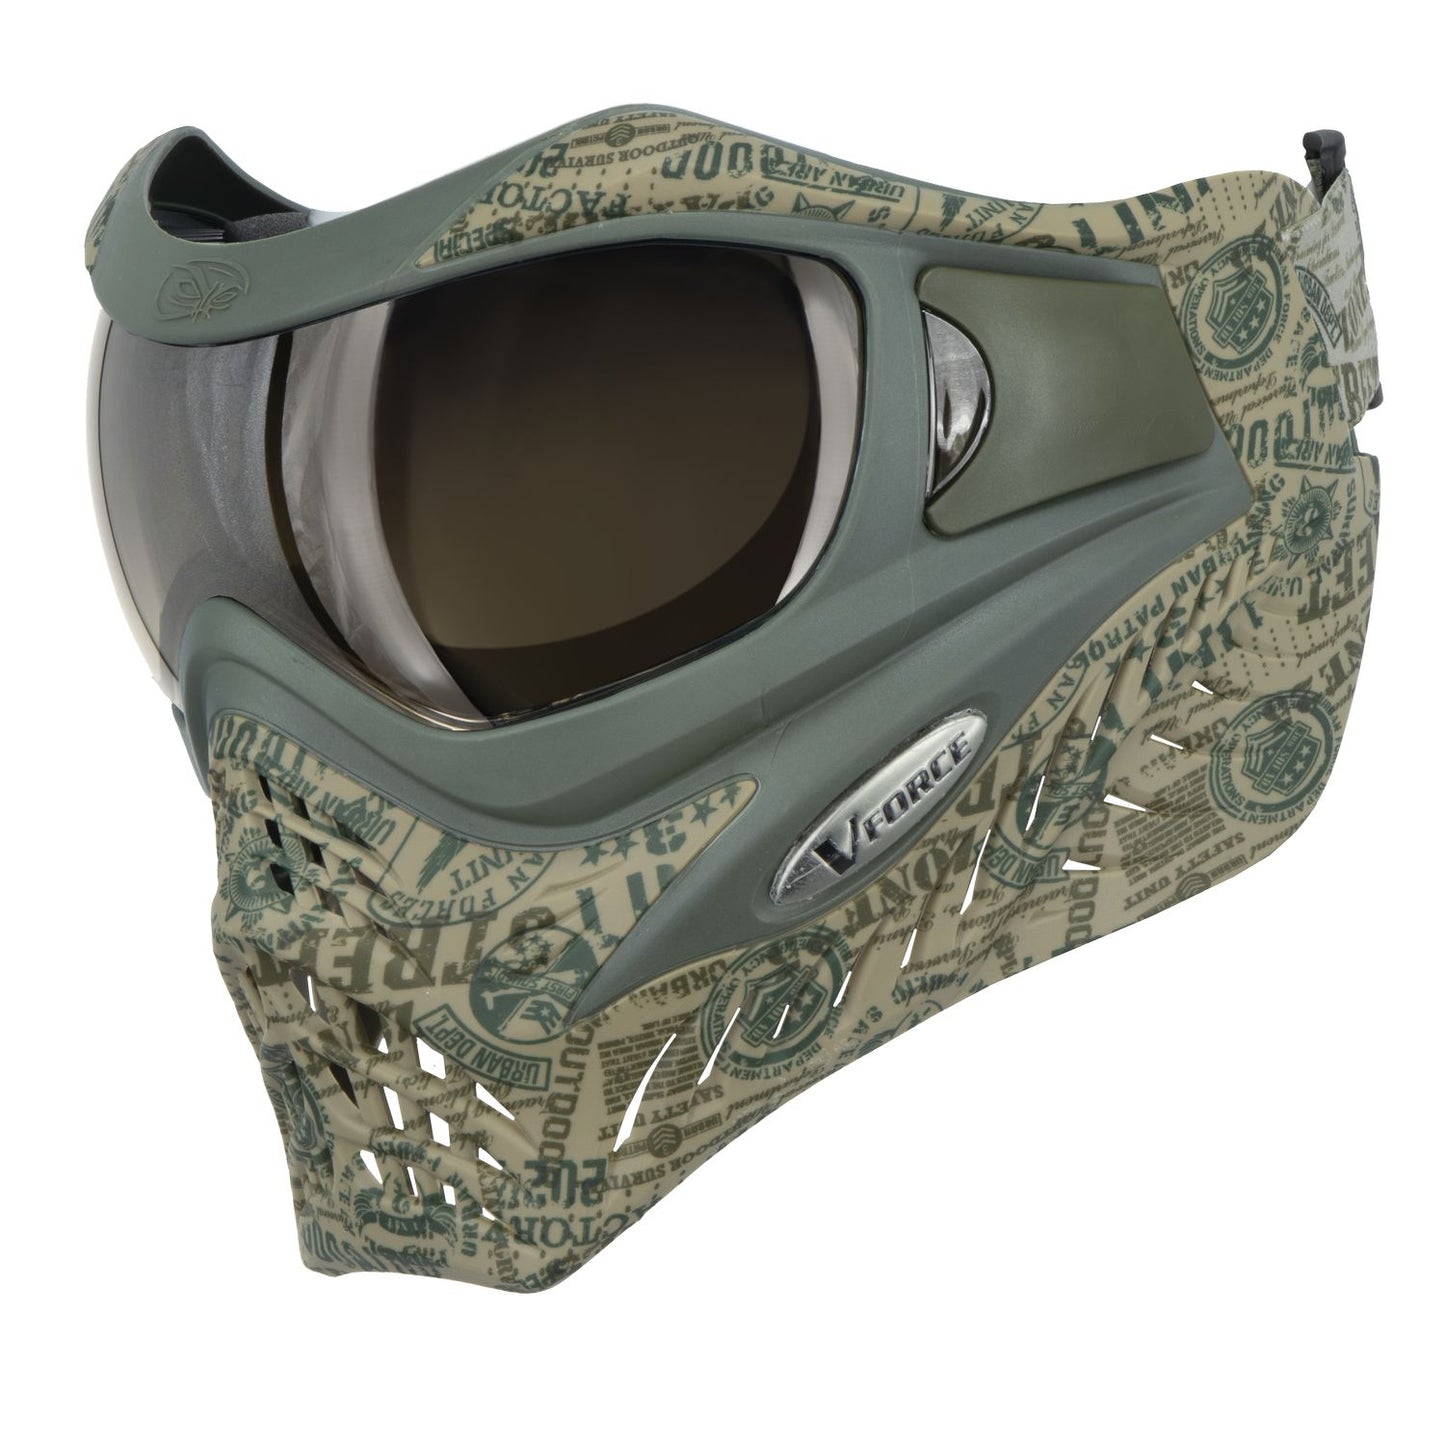 V-Force Grill SE Paintball Mask Goggle - Headstamp w/ Quicksilver Lens